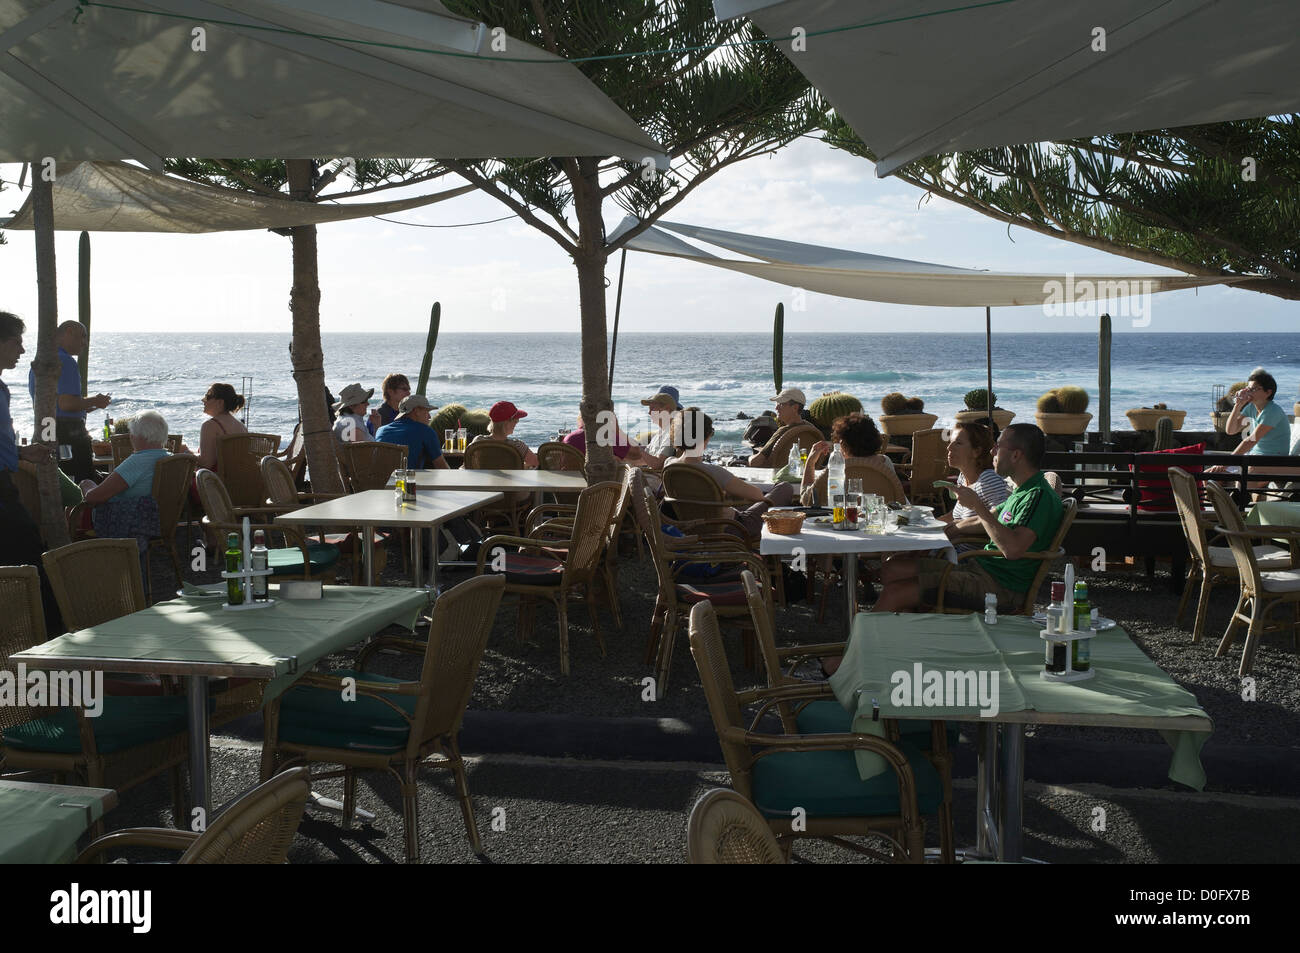 dh Beach cafe fish restaurant EL GOLFO LANZAROTE Tourist customers eating outdoors people dining out alfresco seafood canary islands outdoor sea Stock Photo